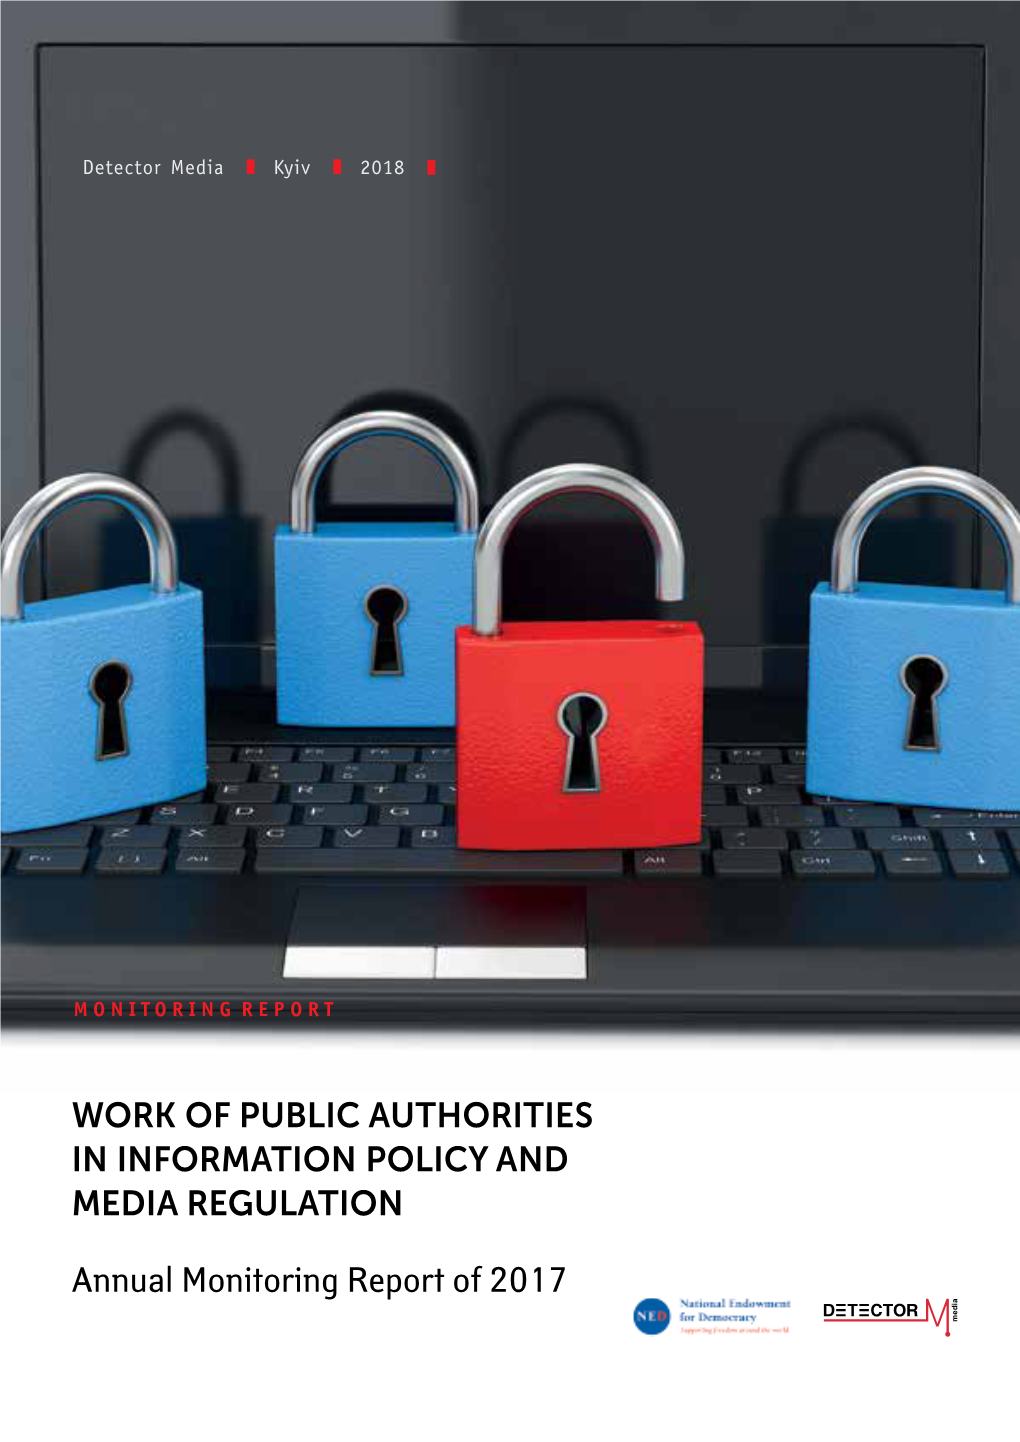 Work of Public Authorities in Information Policy and Media Regulation